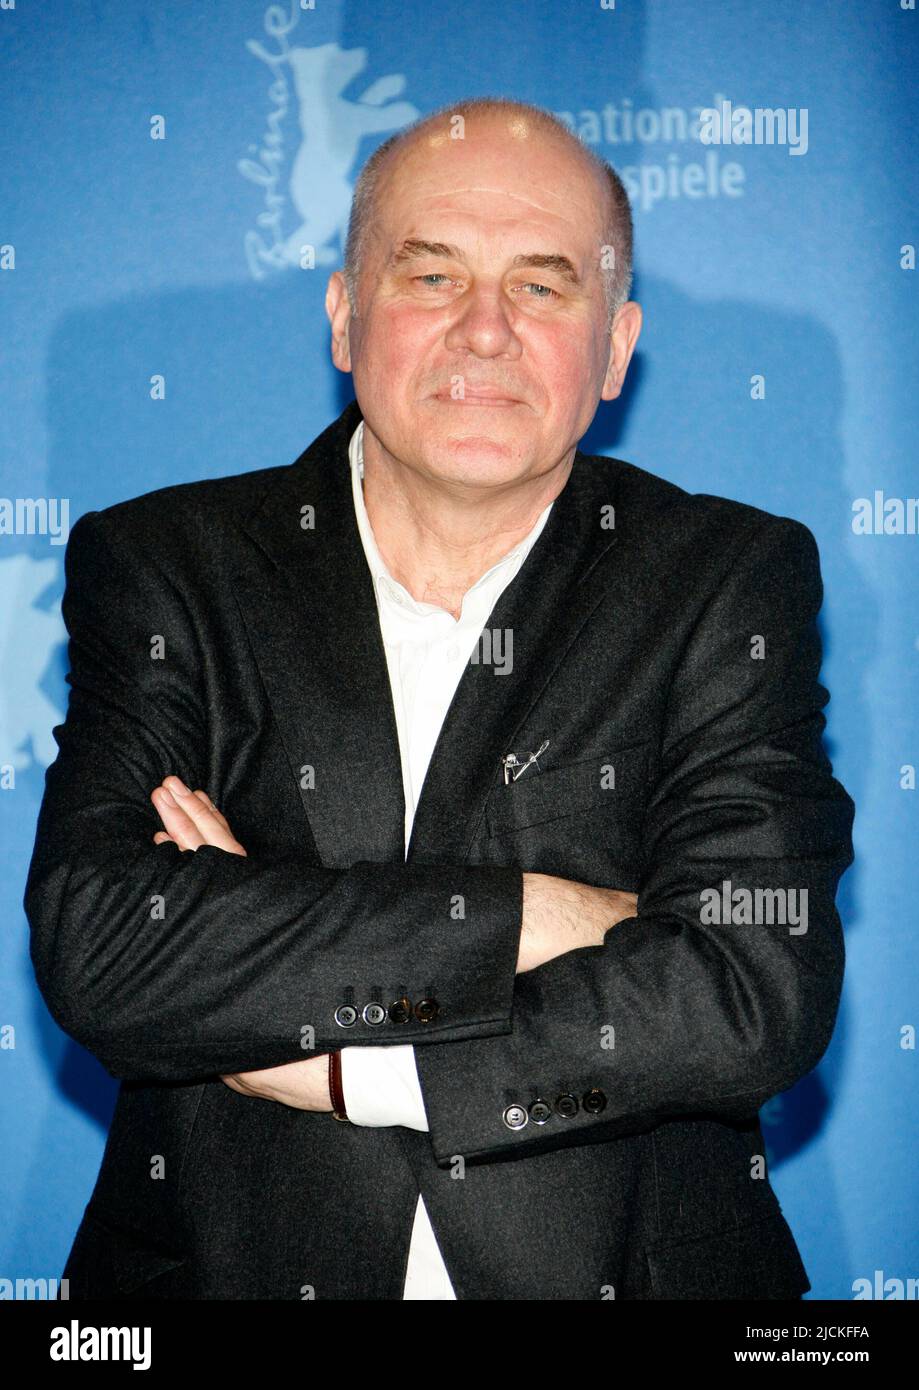 Berlin, Deutschland. 12th Feb, 2009. ARCHIVE PHOTO: The actor Hanns Zischler turns 75 on June 18, 2022, photocall "Hilde" actor Hanns ZISCHLER, portrait, portrait, Germany Berlinale Special Gala Photocall, photo session, press conference, photocall, presentation, 59. Berlin International Film Festival from February 5th to 15th, 2009 in Berlin, Berlinale, February 12th, 2009 Credit: dpa/Alamy Live News Stock Photo